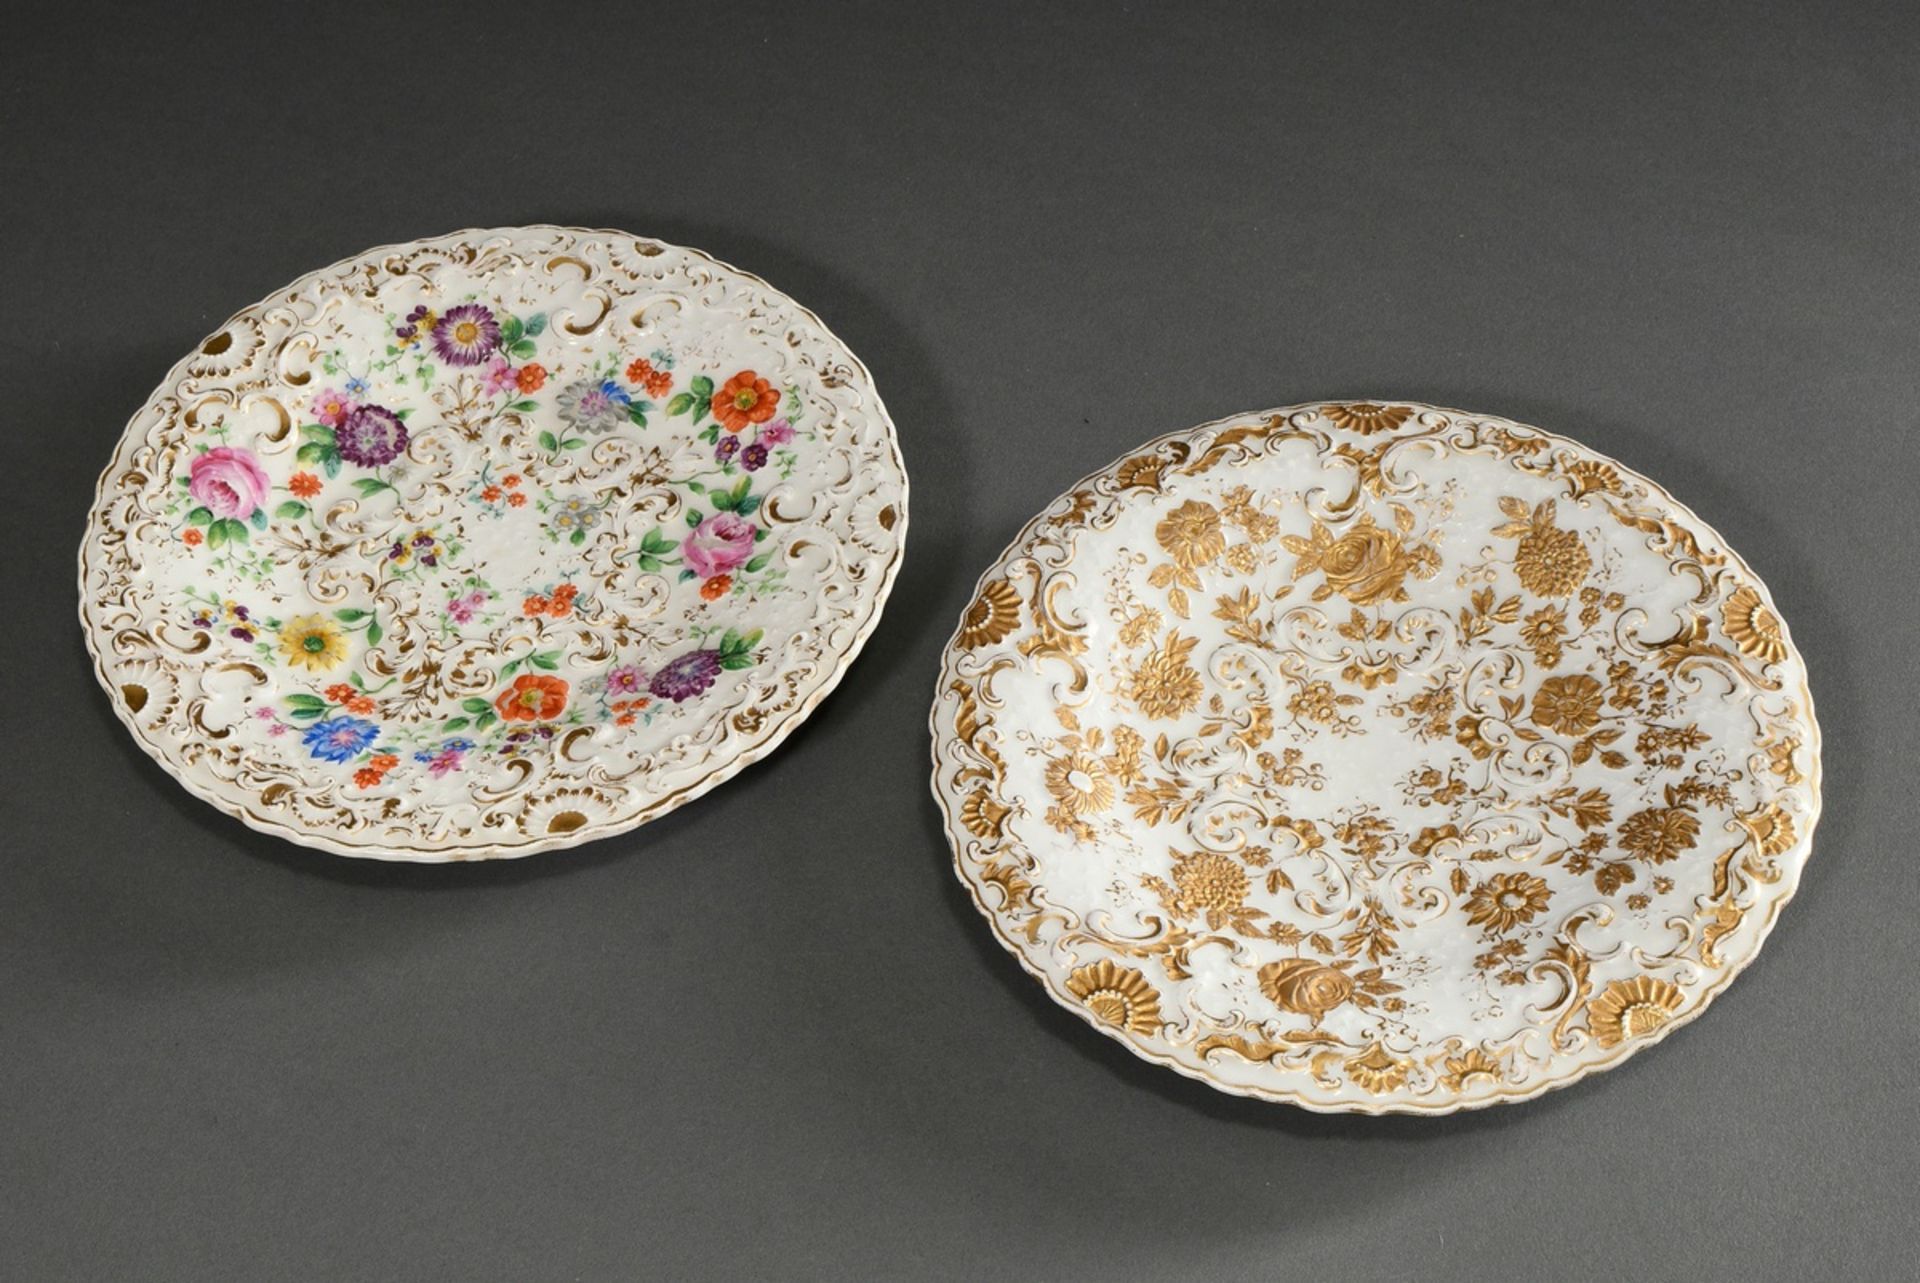 2 Various Meissen ceremonial plates with relief flower decoration, polychrome and gold painted, aro - Image 2 of 5